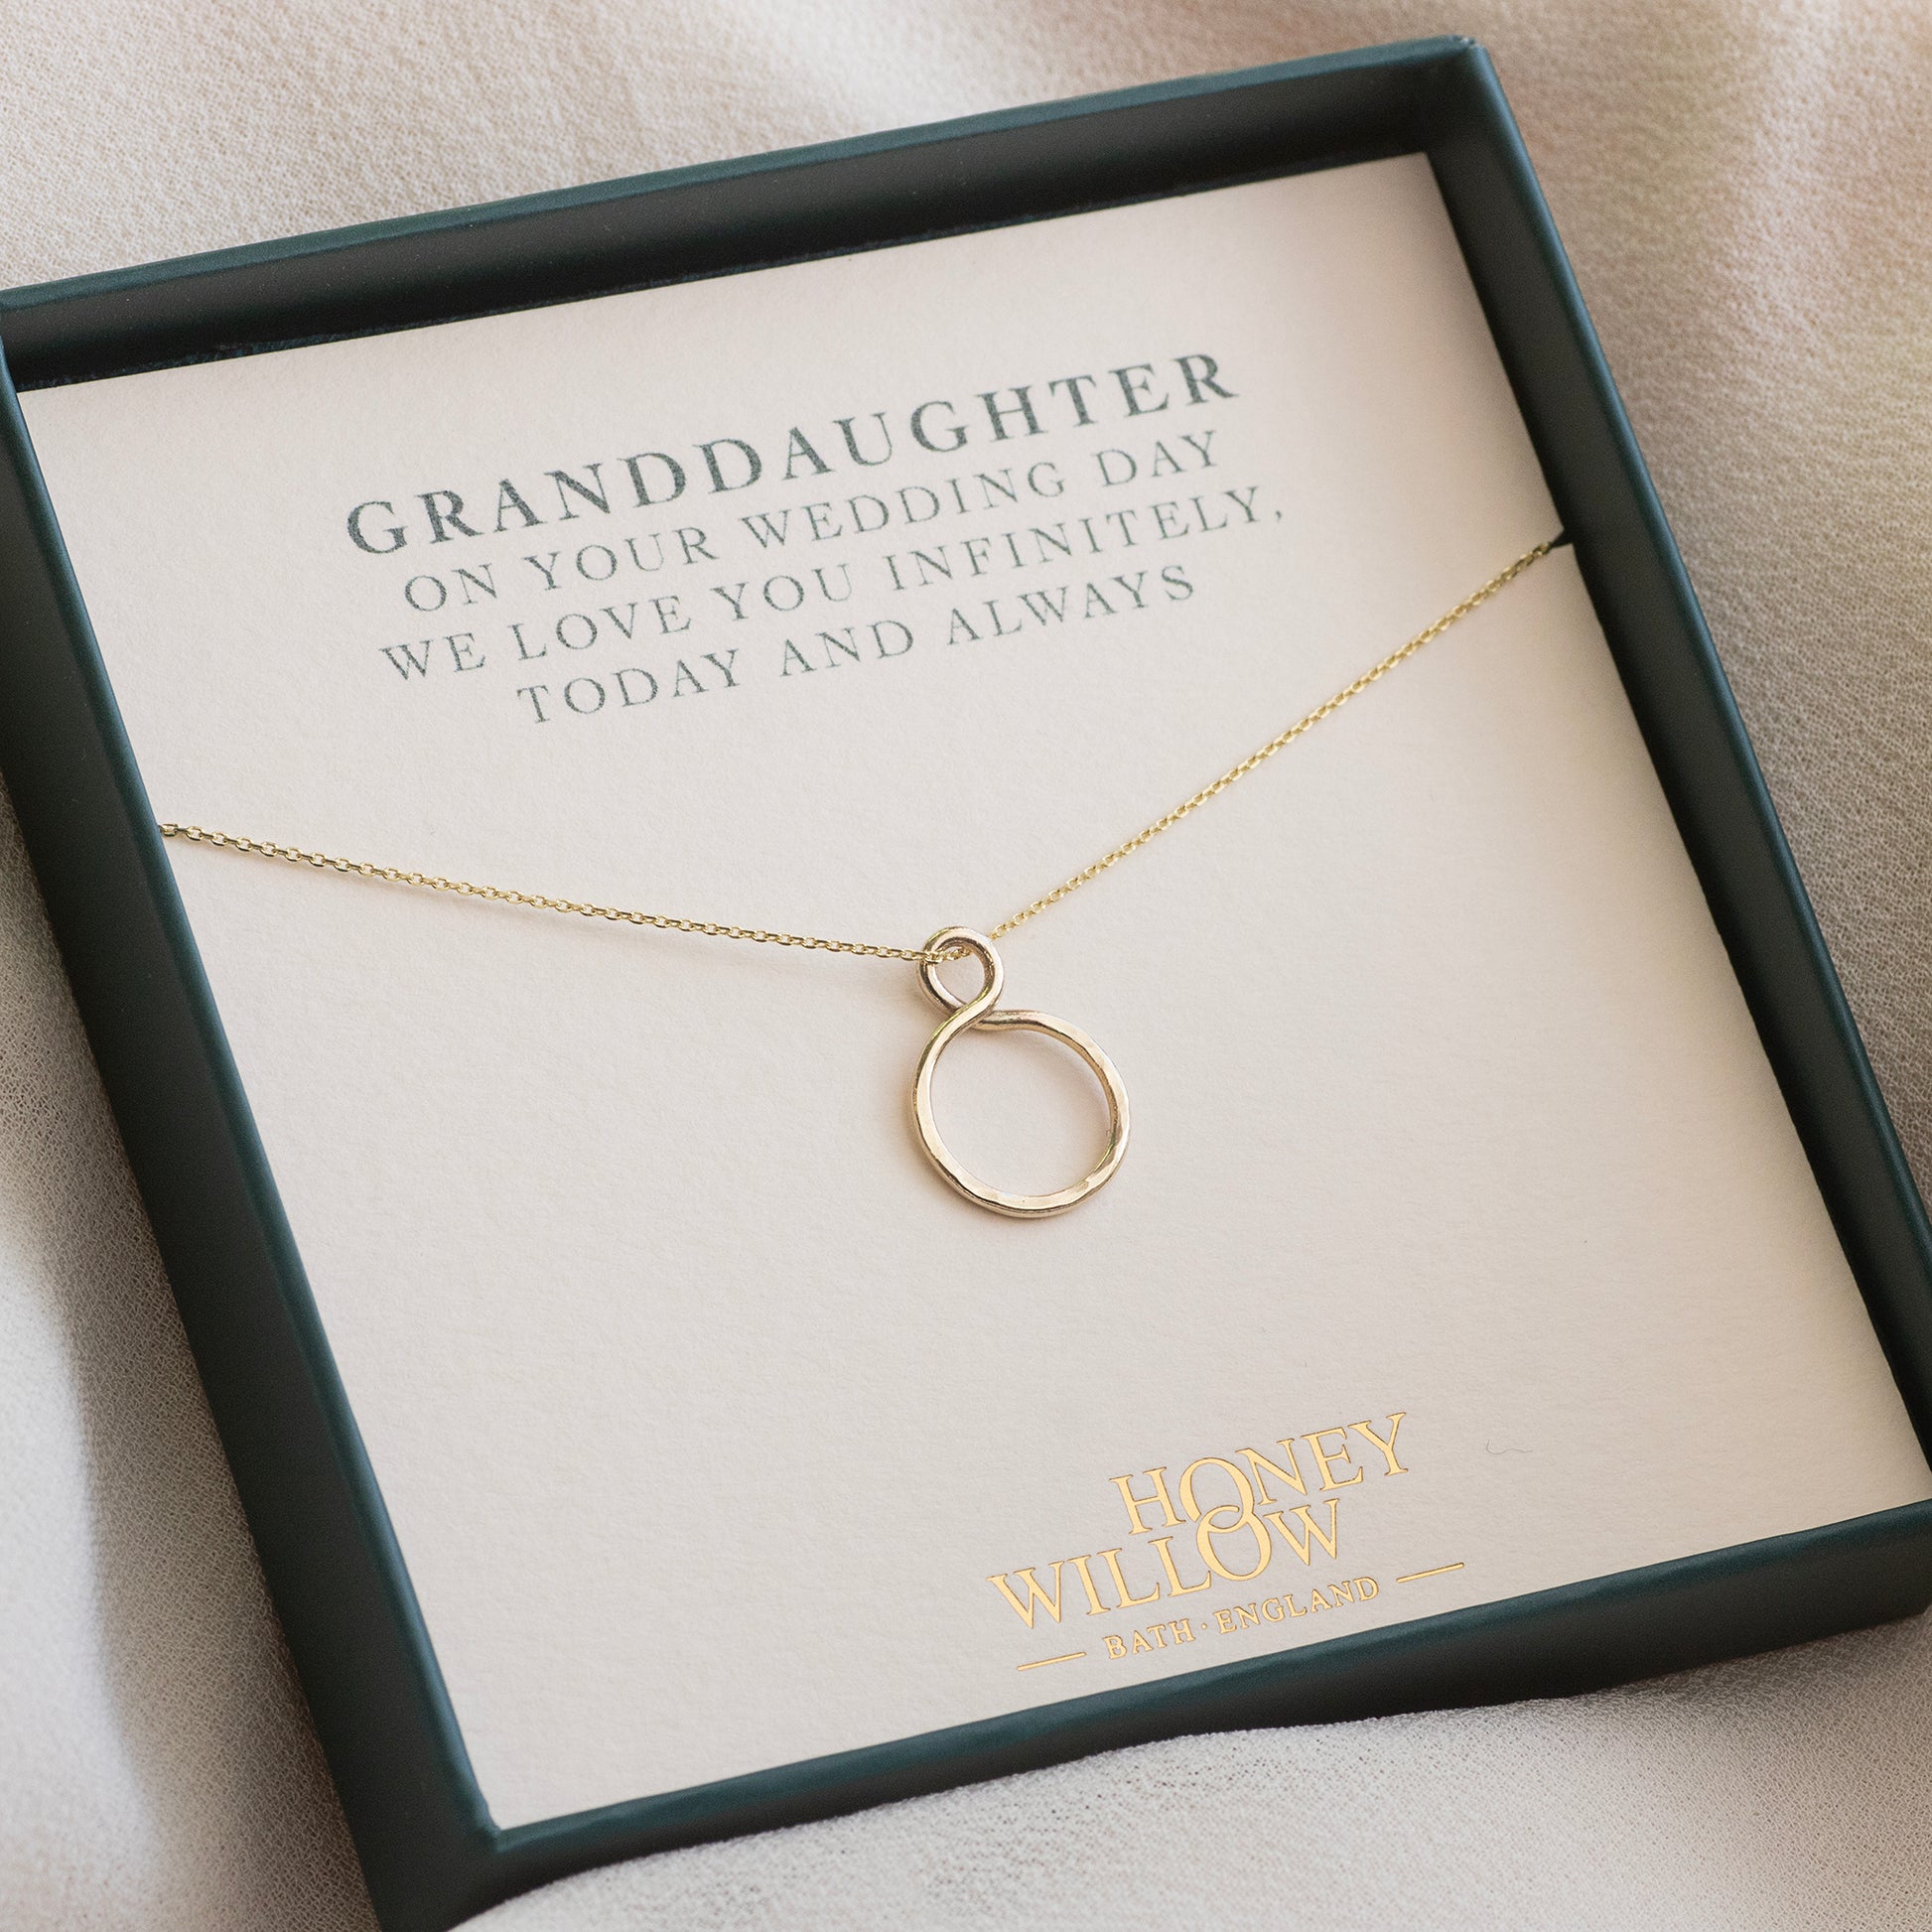 Wedding Day Gift for Granddaughter - 9kt Gold Infinity Necklace